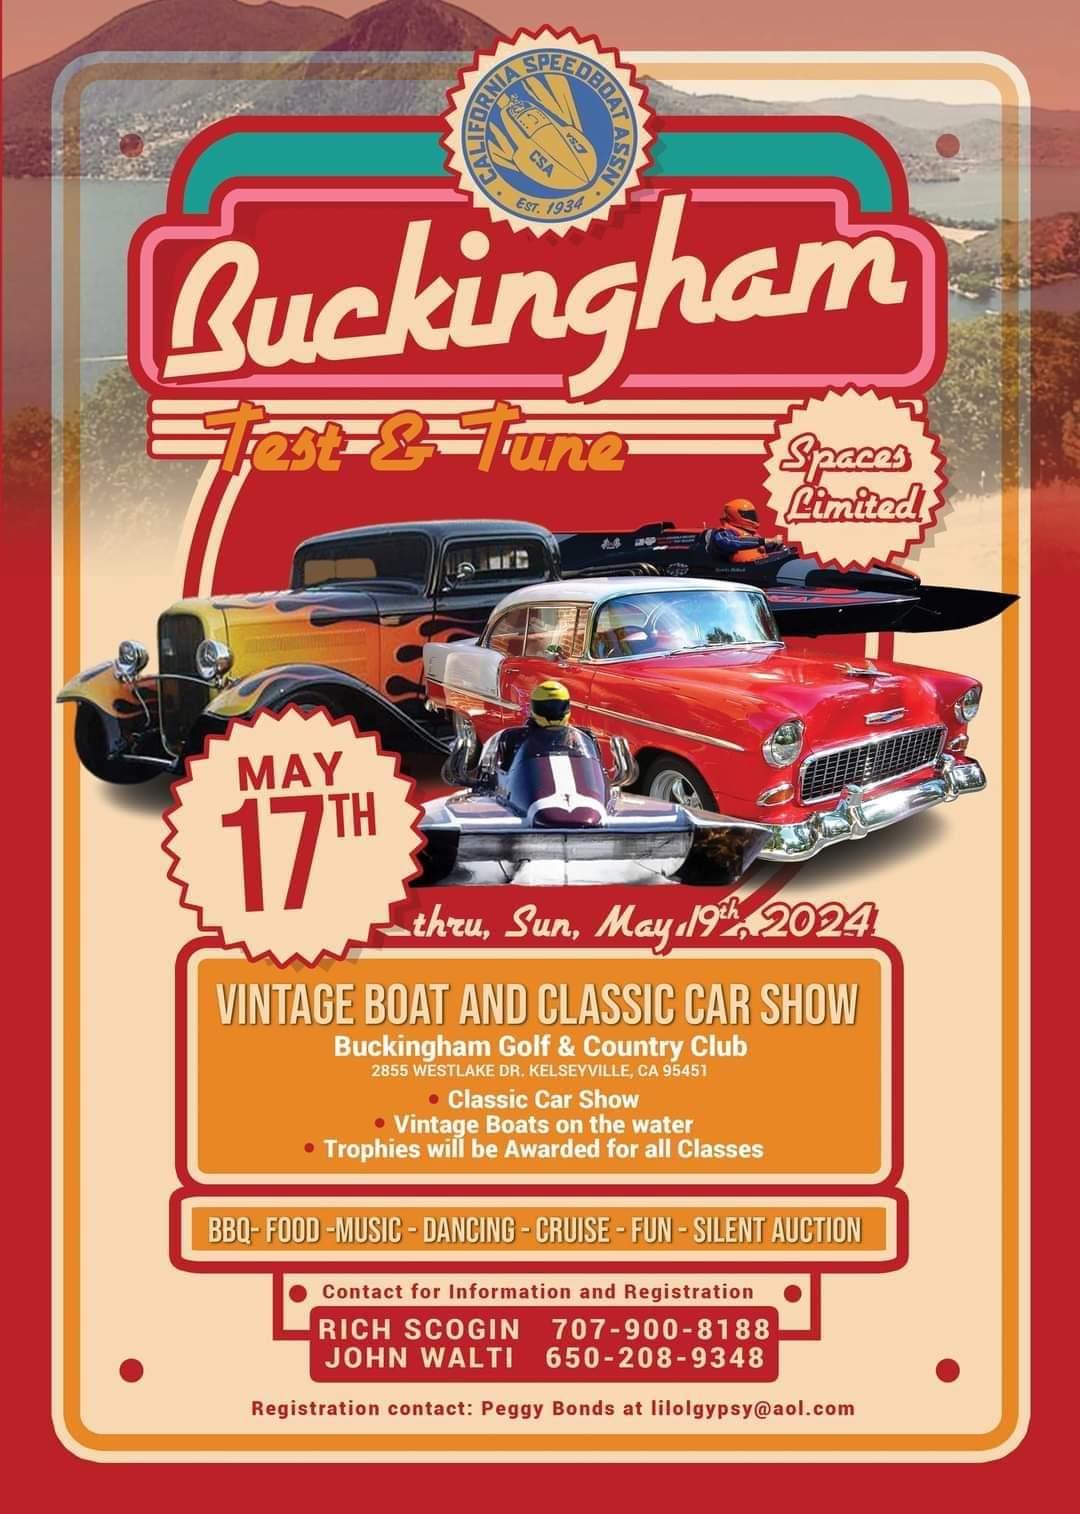 Buckingham Vintage Boat and Classic Car Show